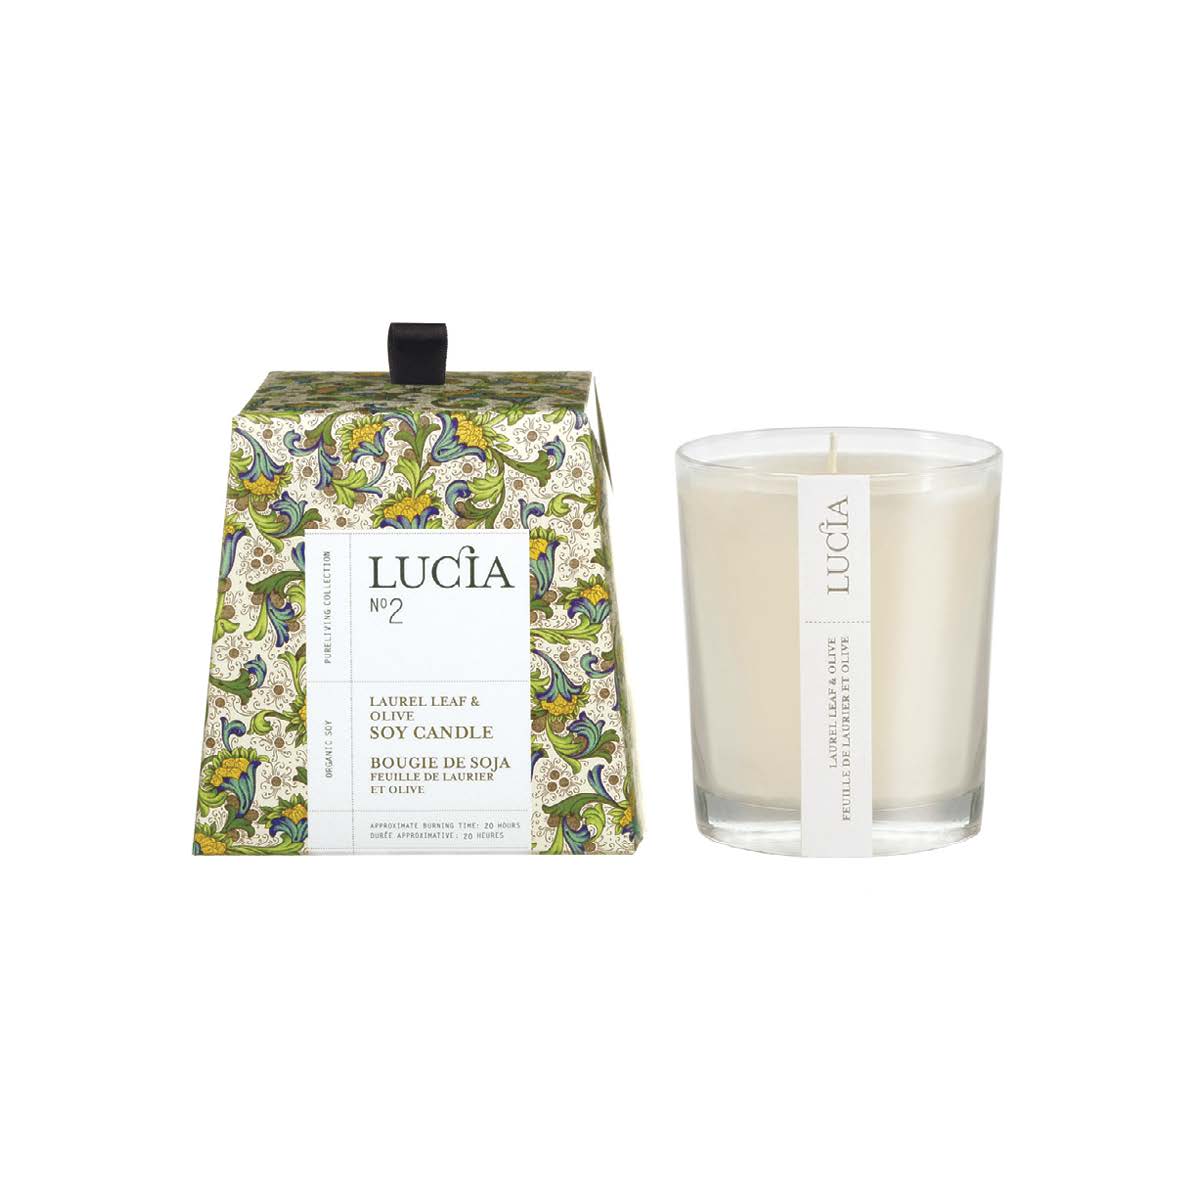 Lucia Candle Organic Soy No. 2 Laurel Leaf and Olive